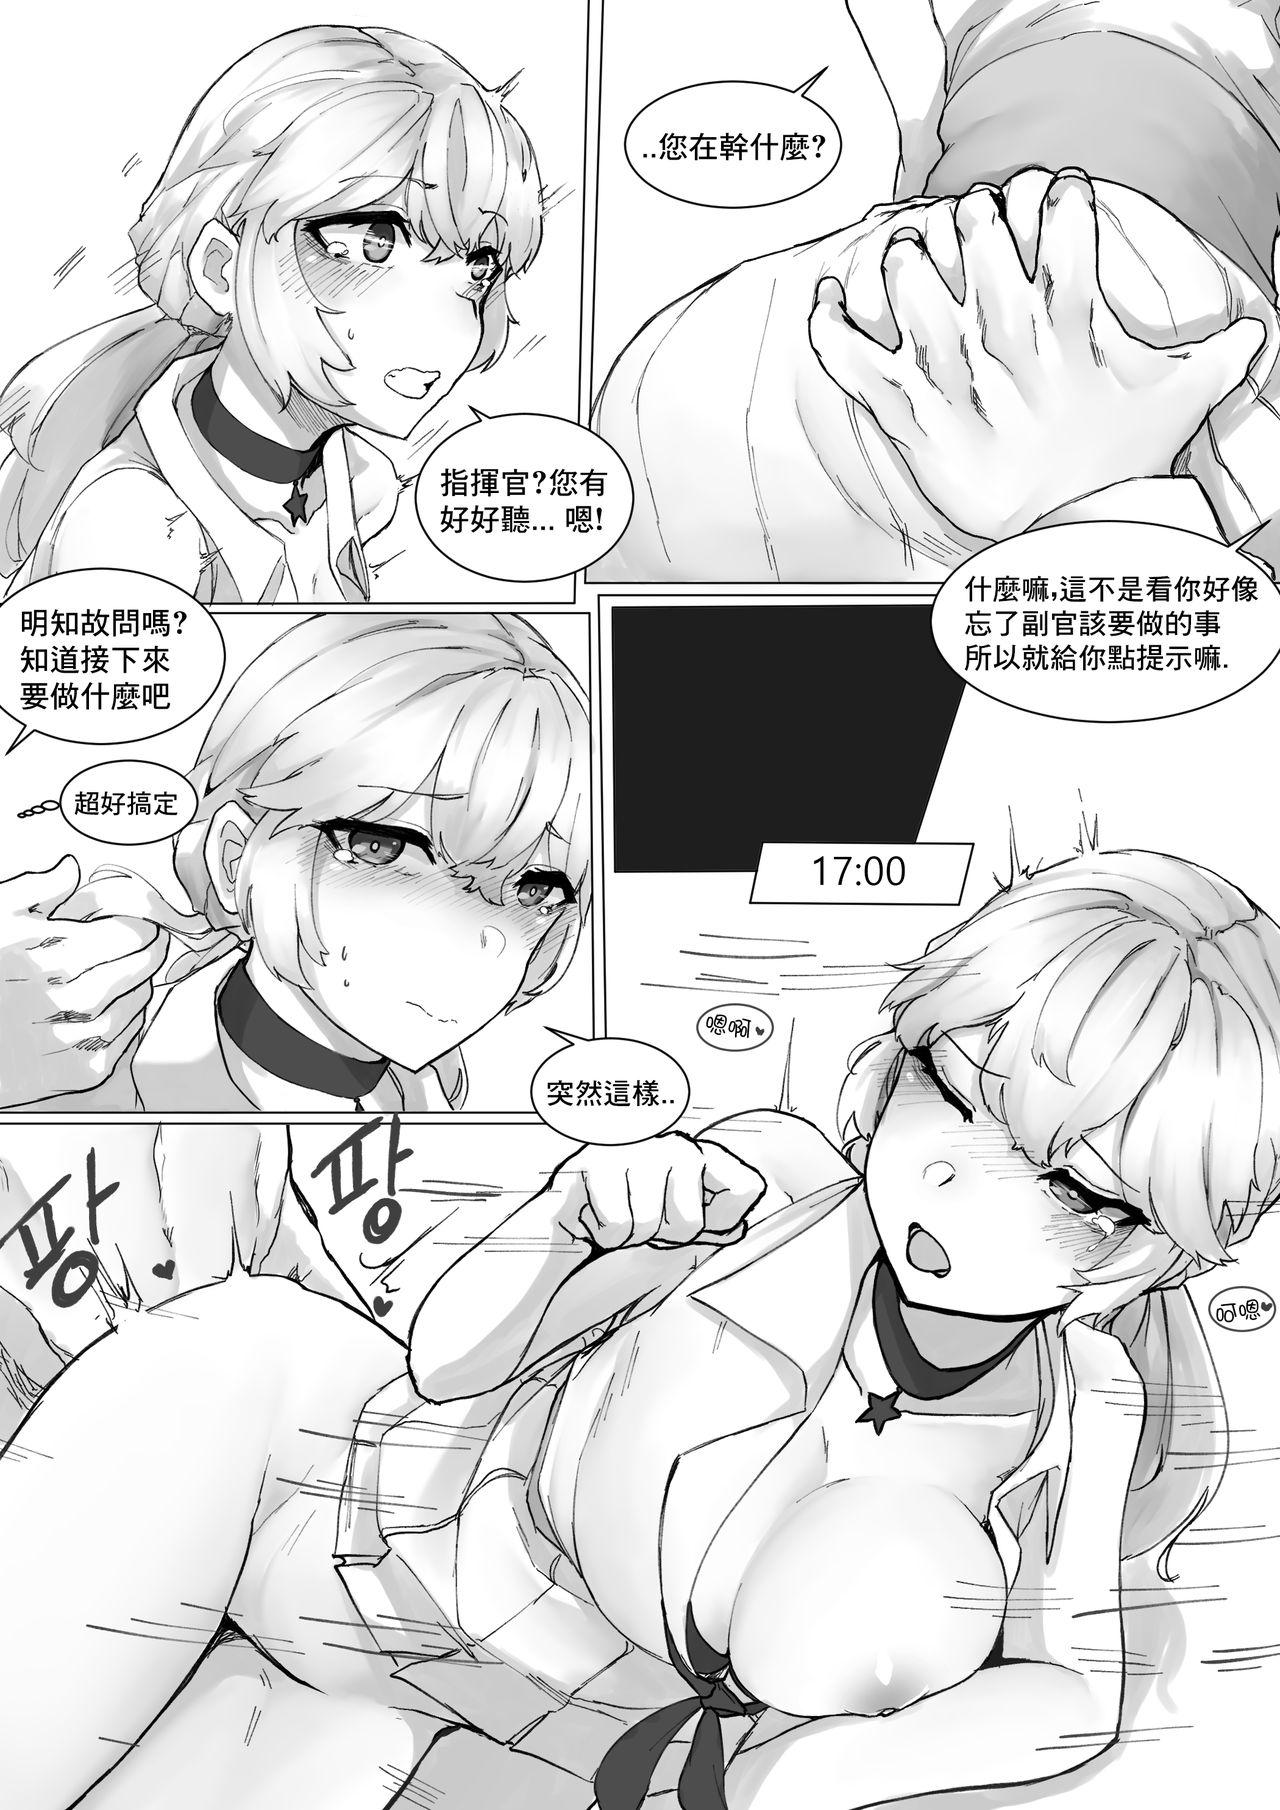 Dad How To Use OTS-14 - Girls frontline Rico - Page 5